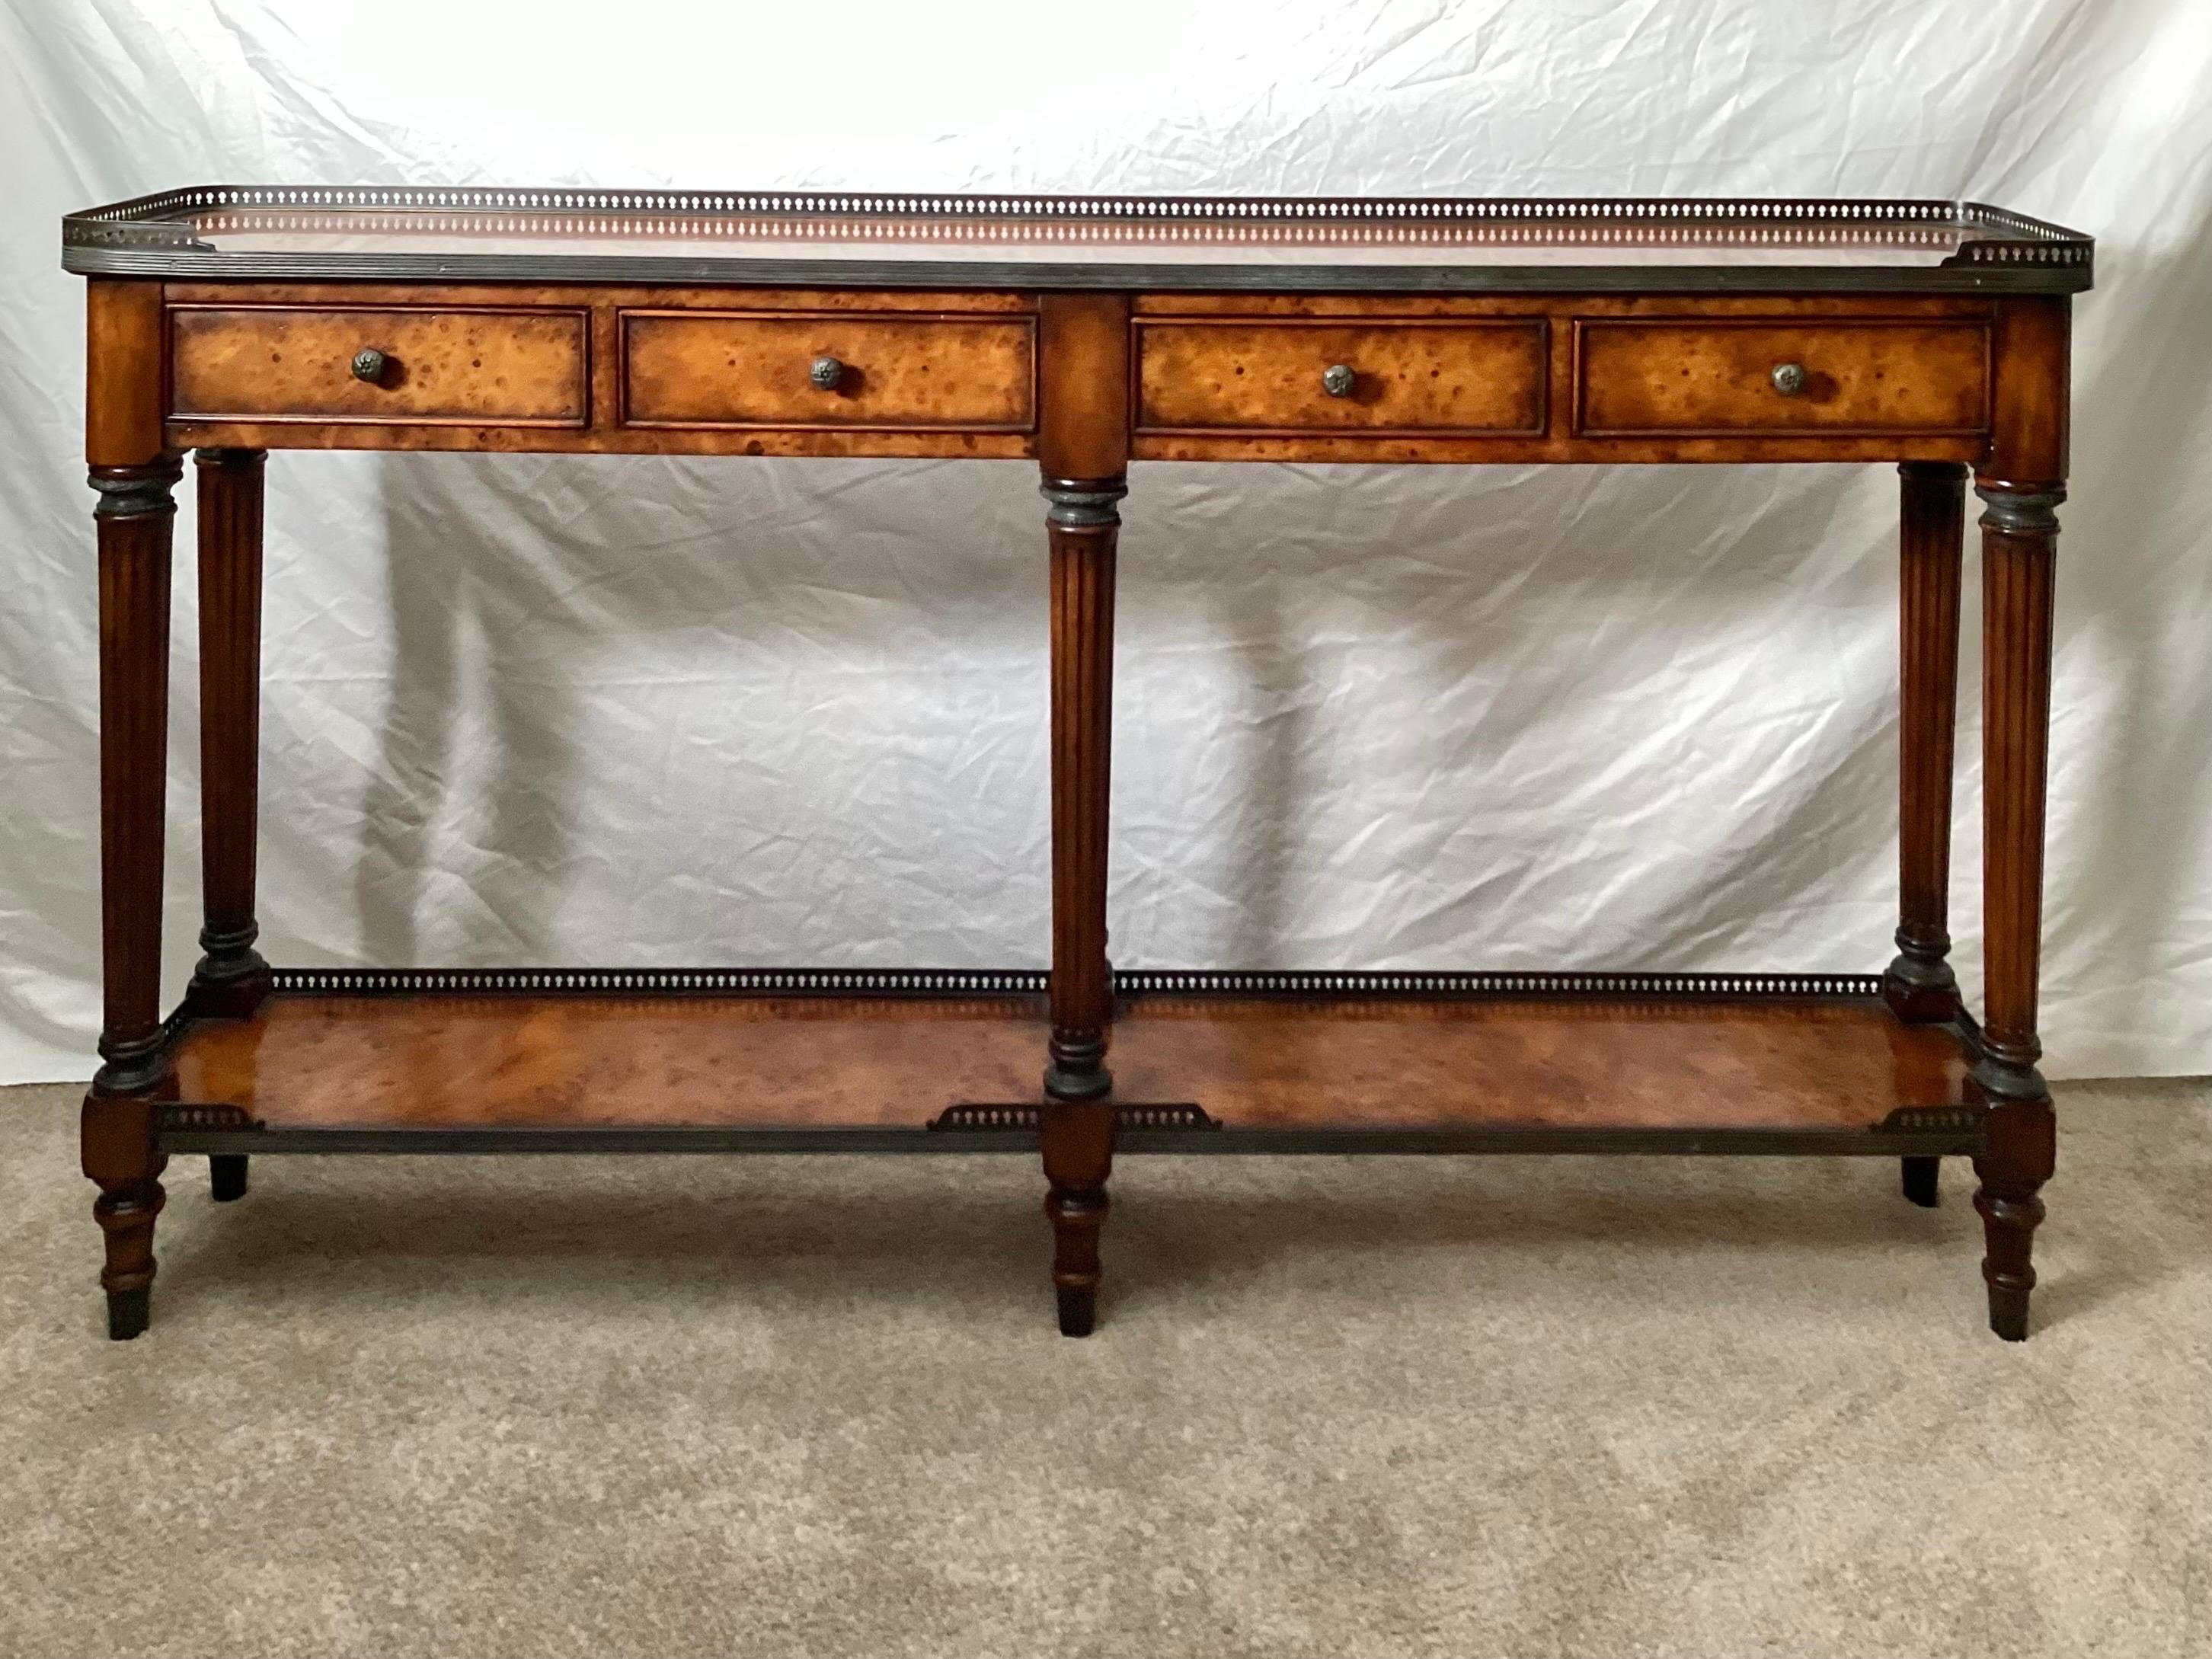 Elegant narrow burled walnut console table with aged brass gallery edge.  Four drawers with six fluted legs joined by a lower galley edge shelf.  33 inches high, 58 inches wide, and a slim 11 inches deep.  Marked on the inside of the drawer Maitland